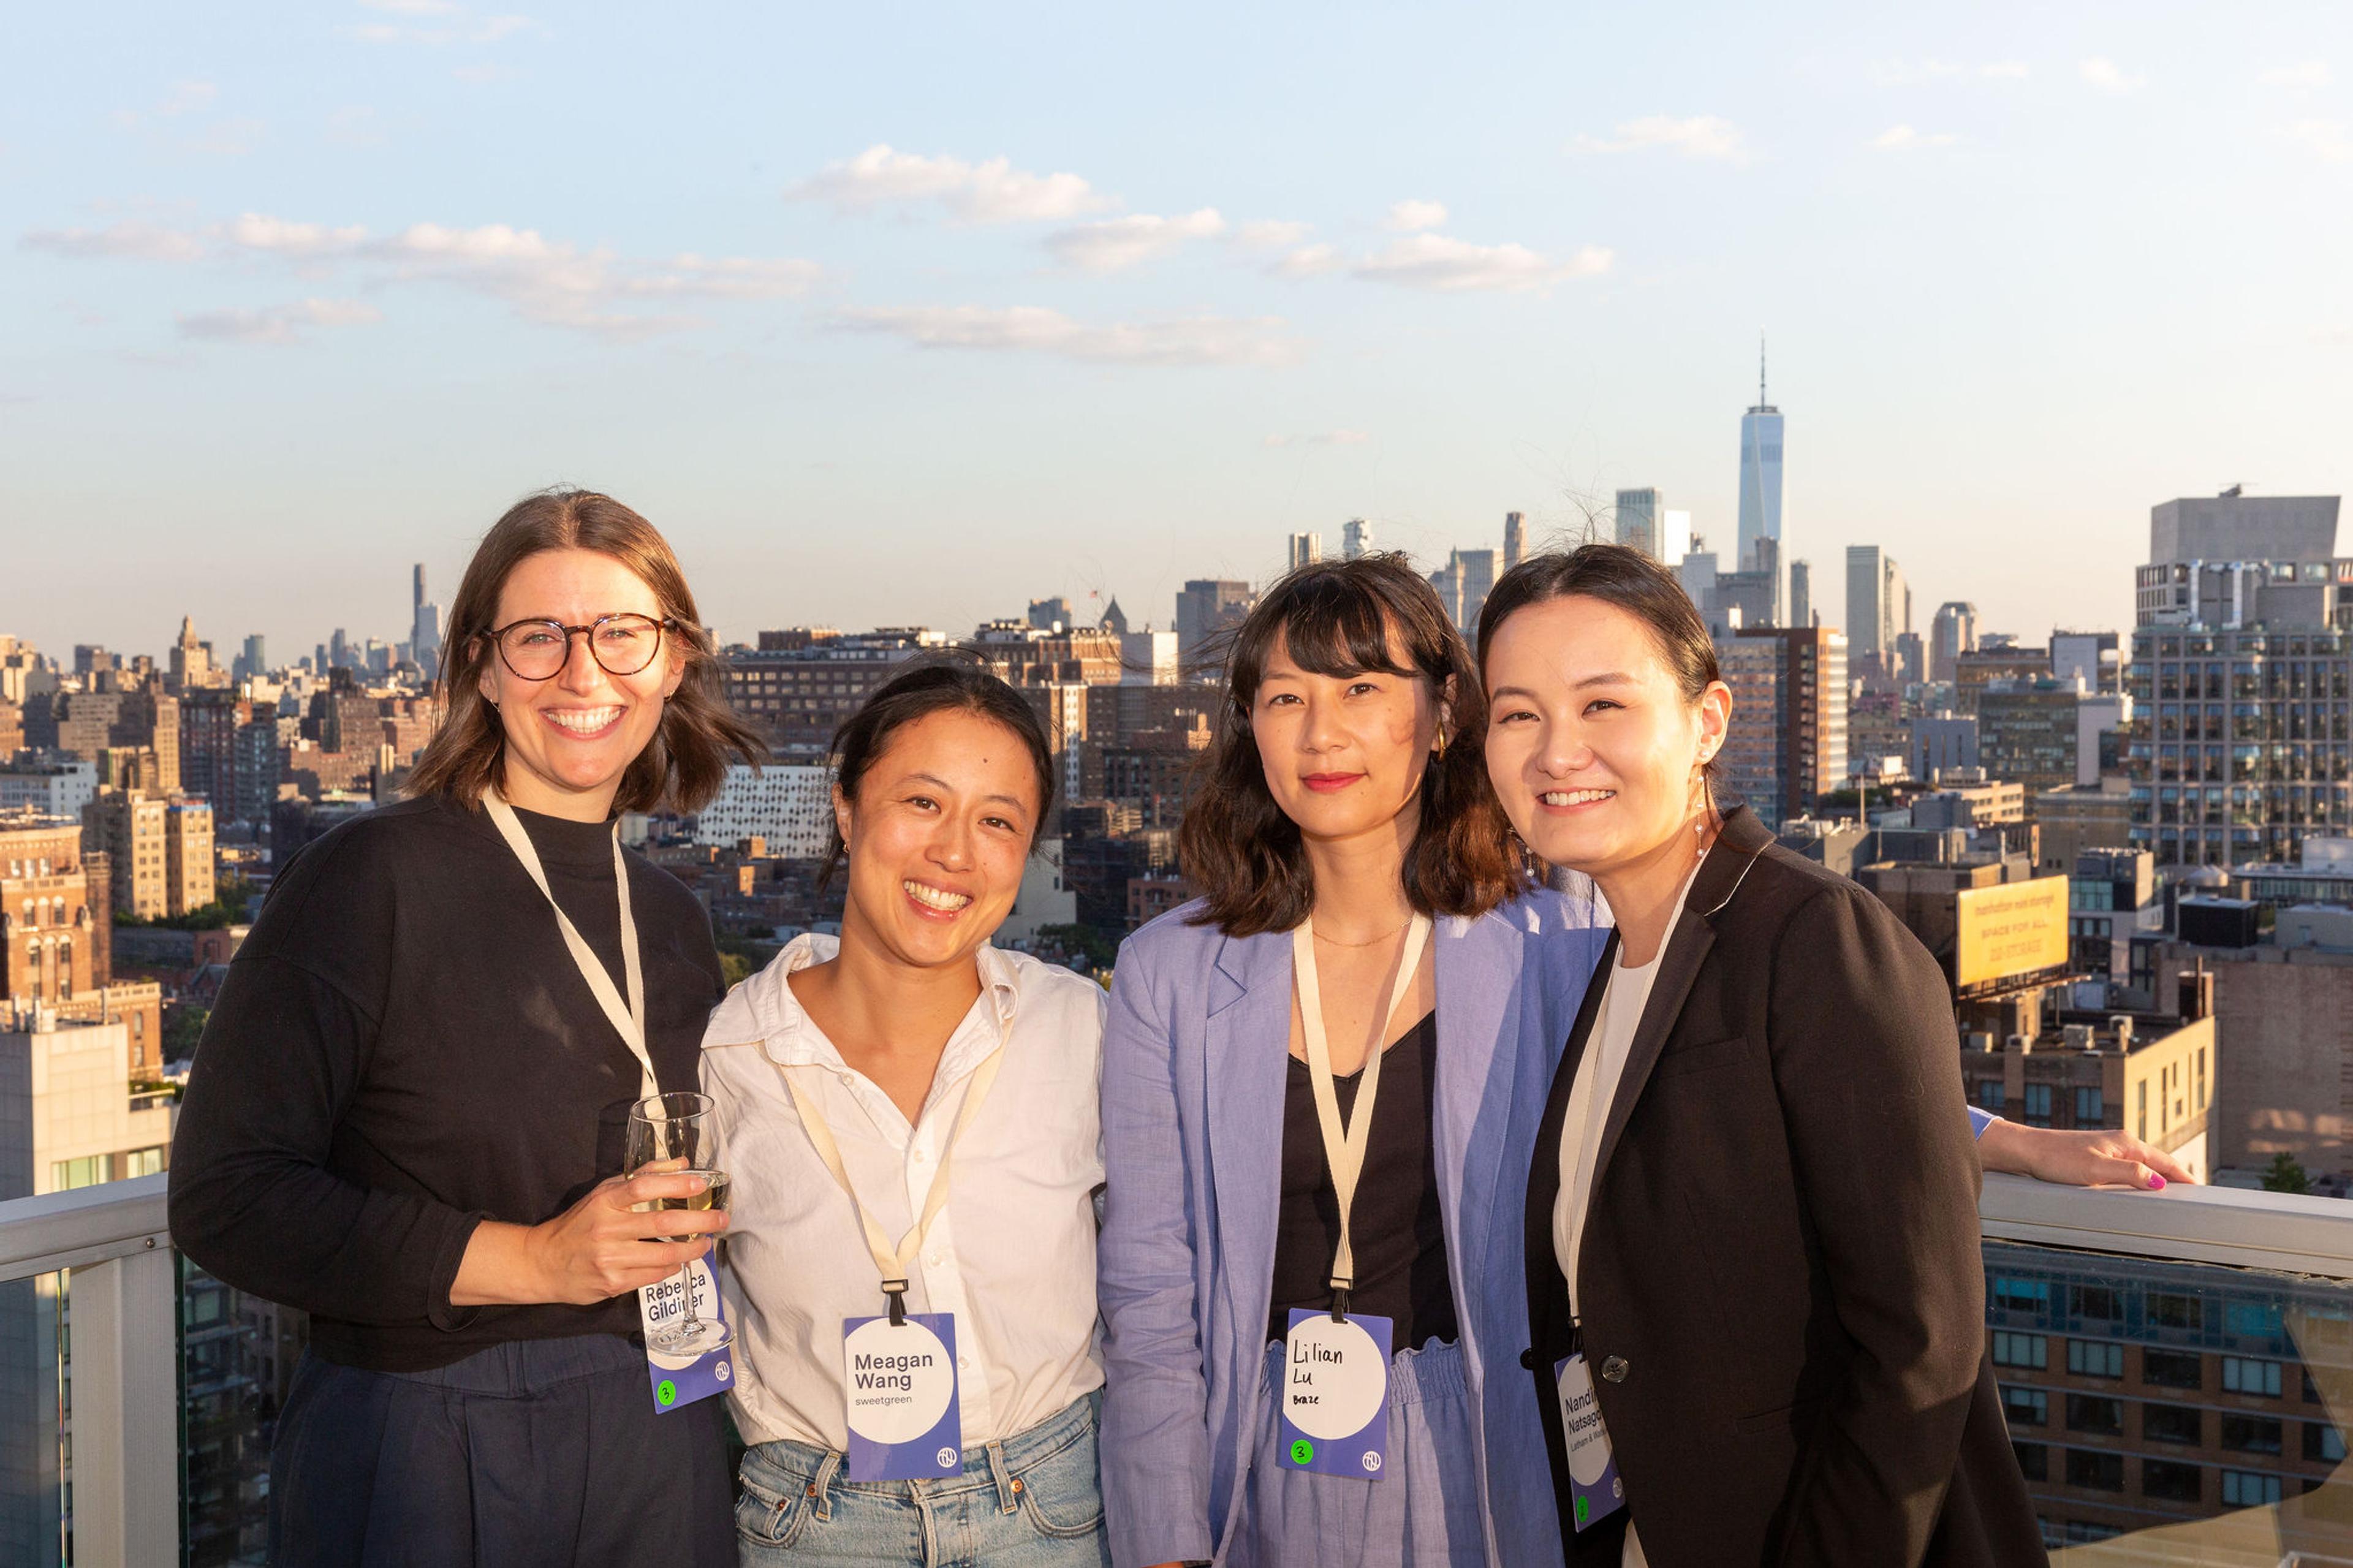 4 women on a rooftop with conference badges